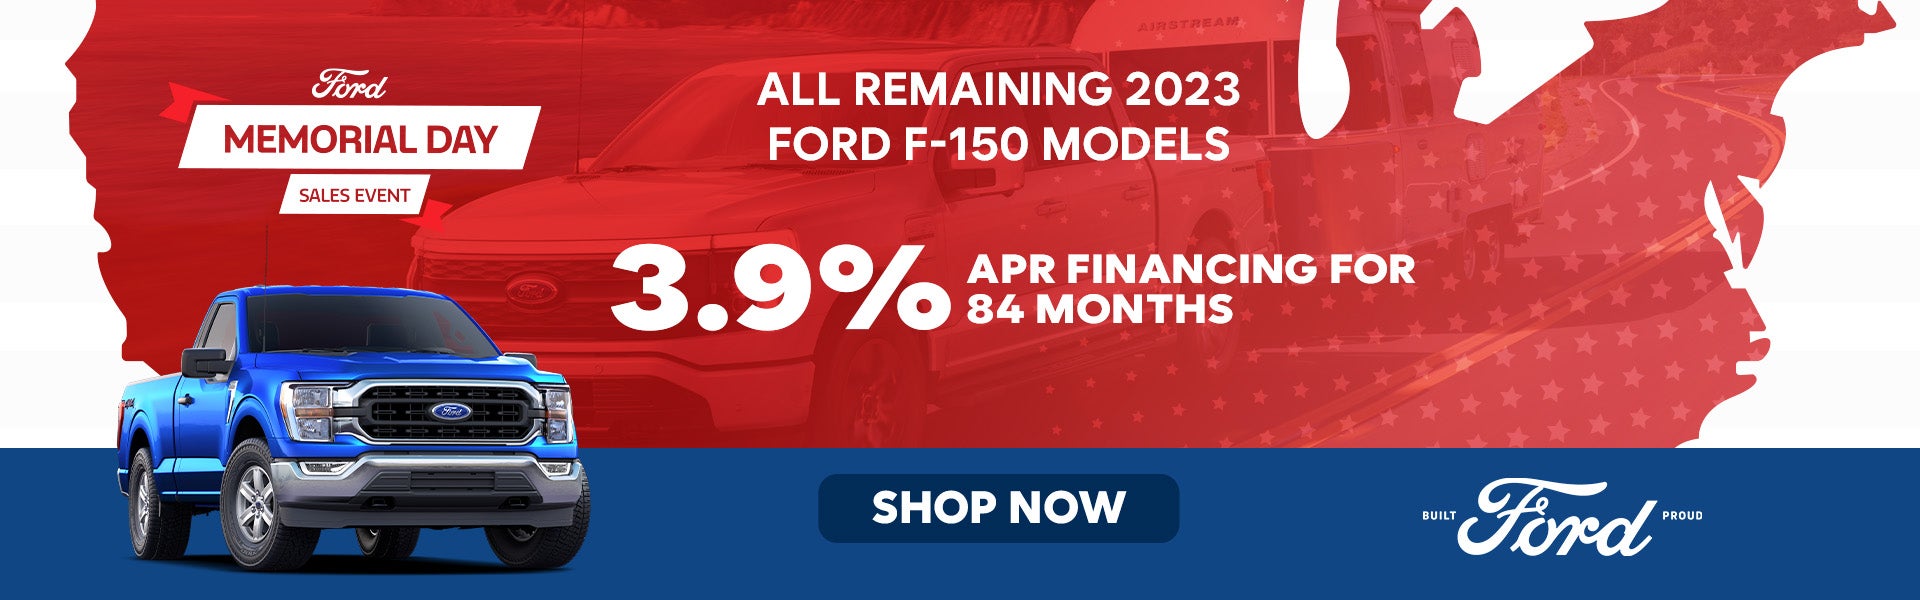 2023 New Ford F-150